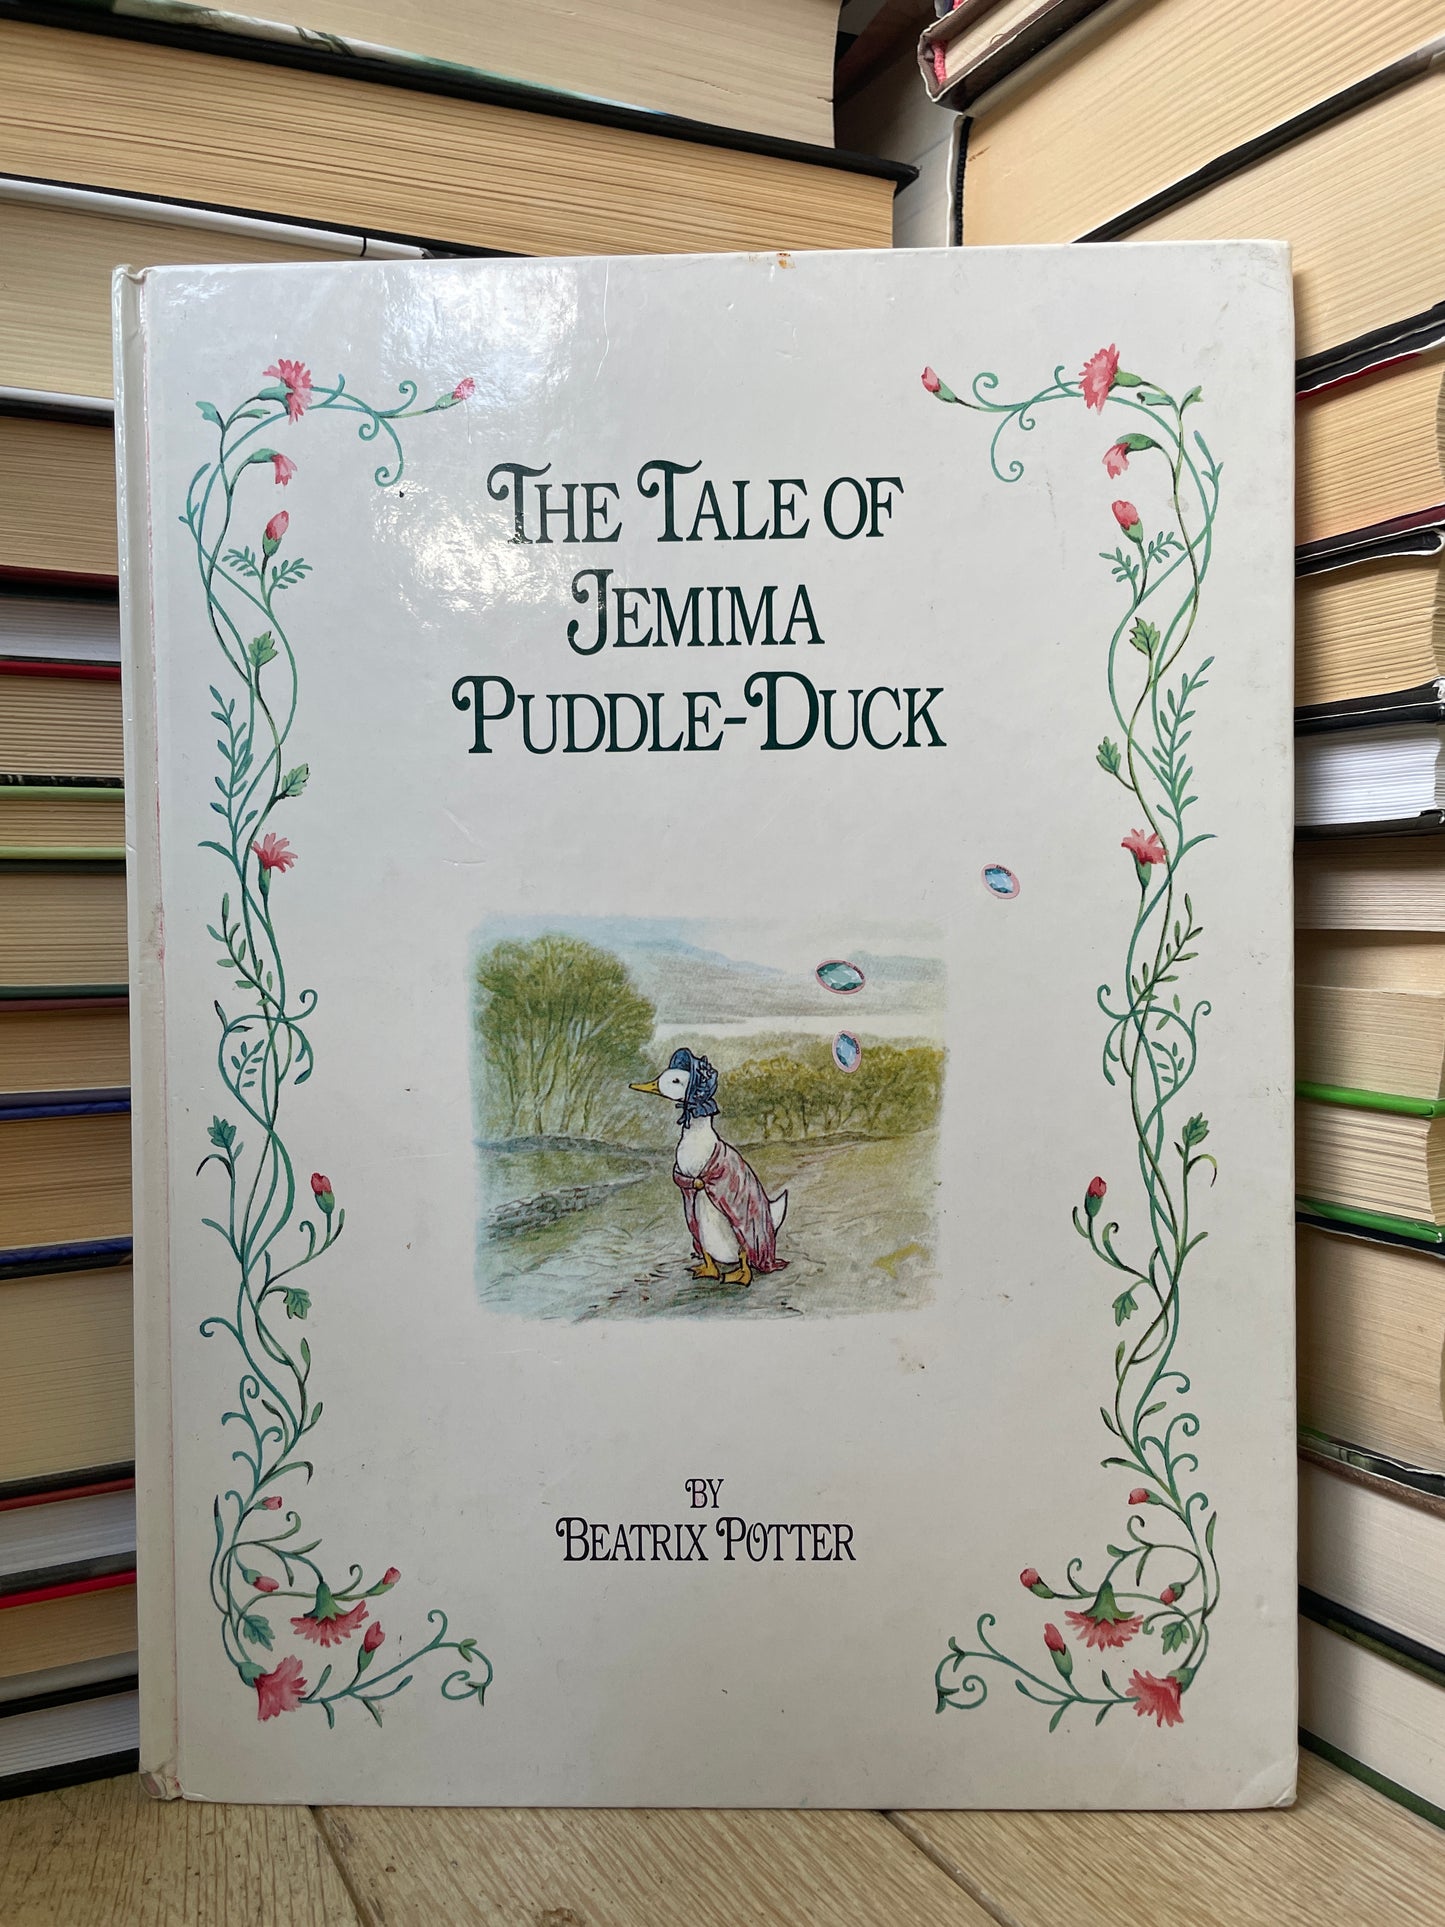 Beatrix Potter - The Tale of Jemima Puddle-Duck